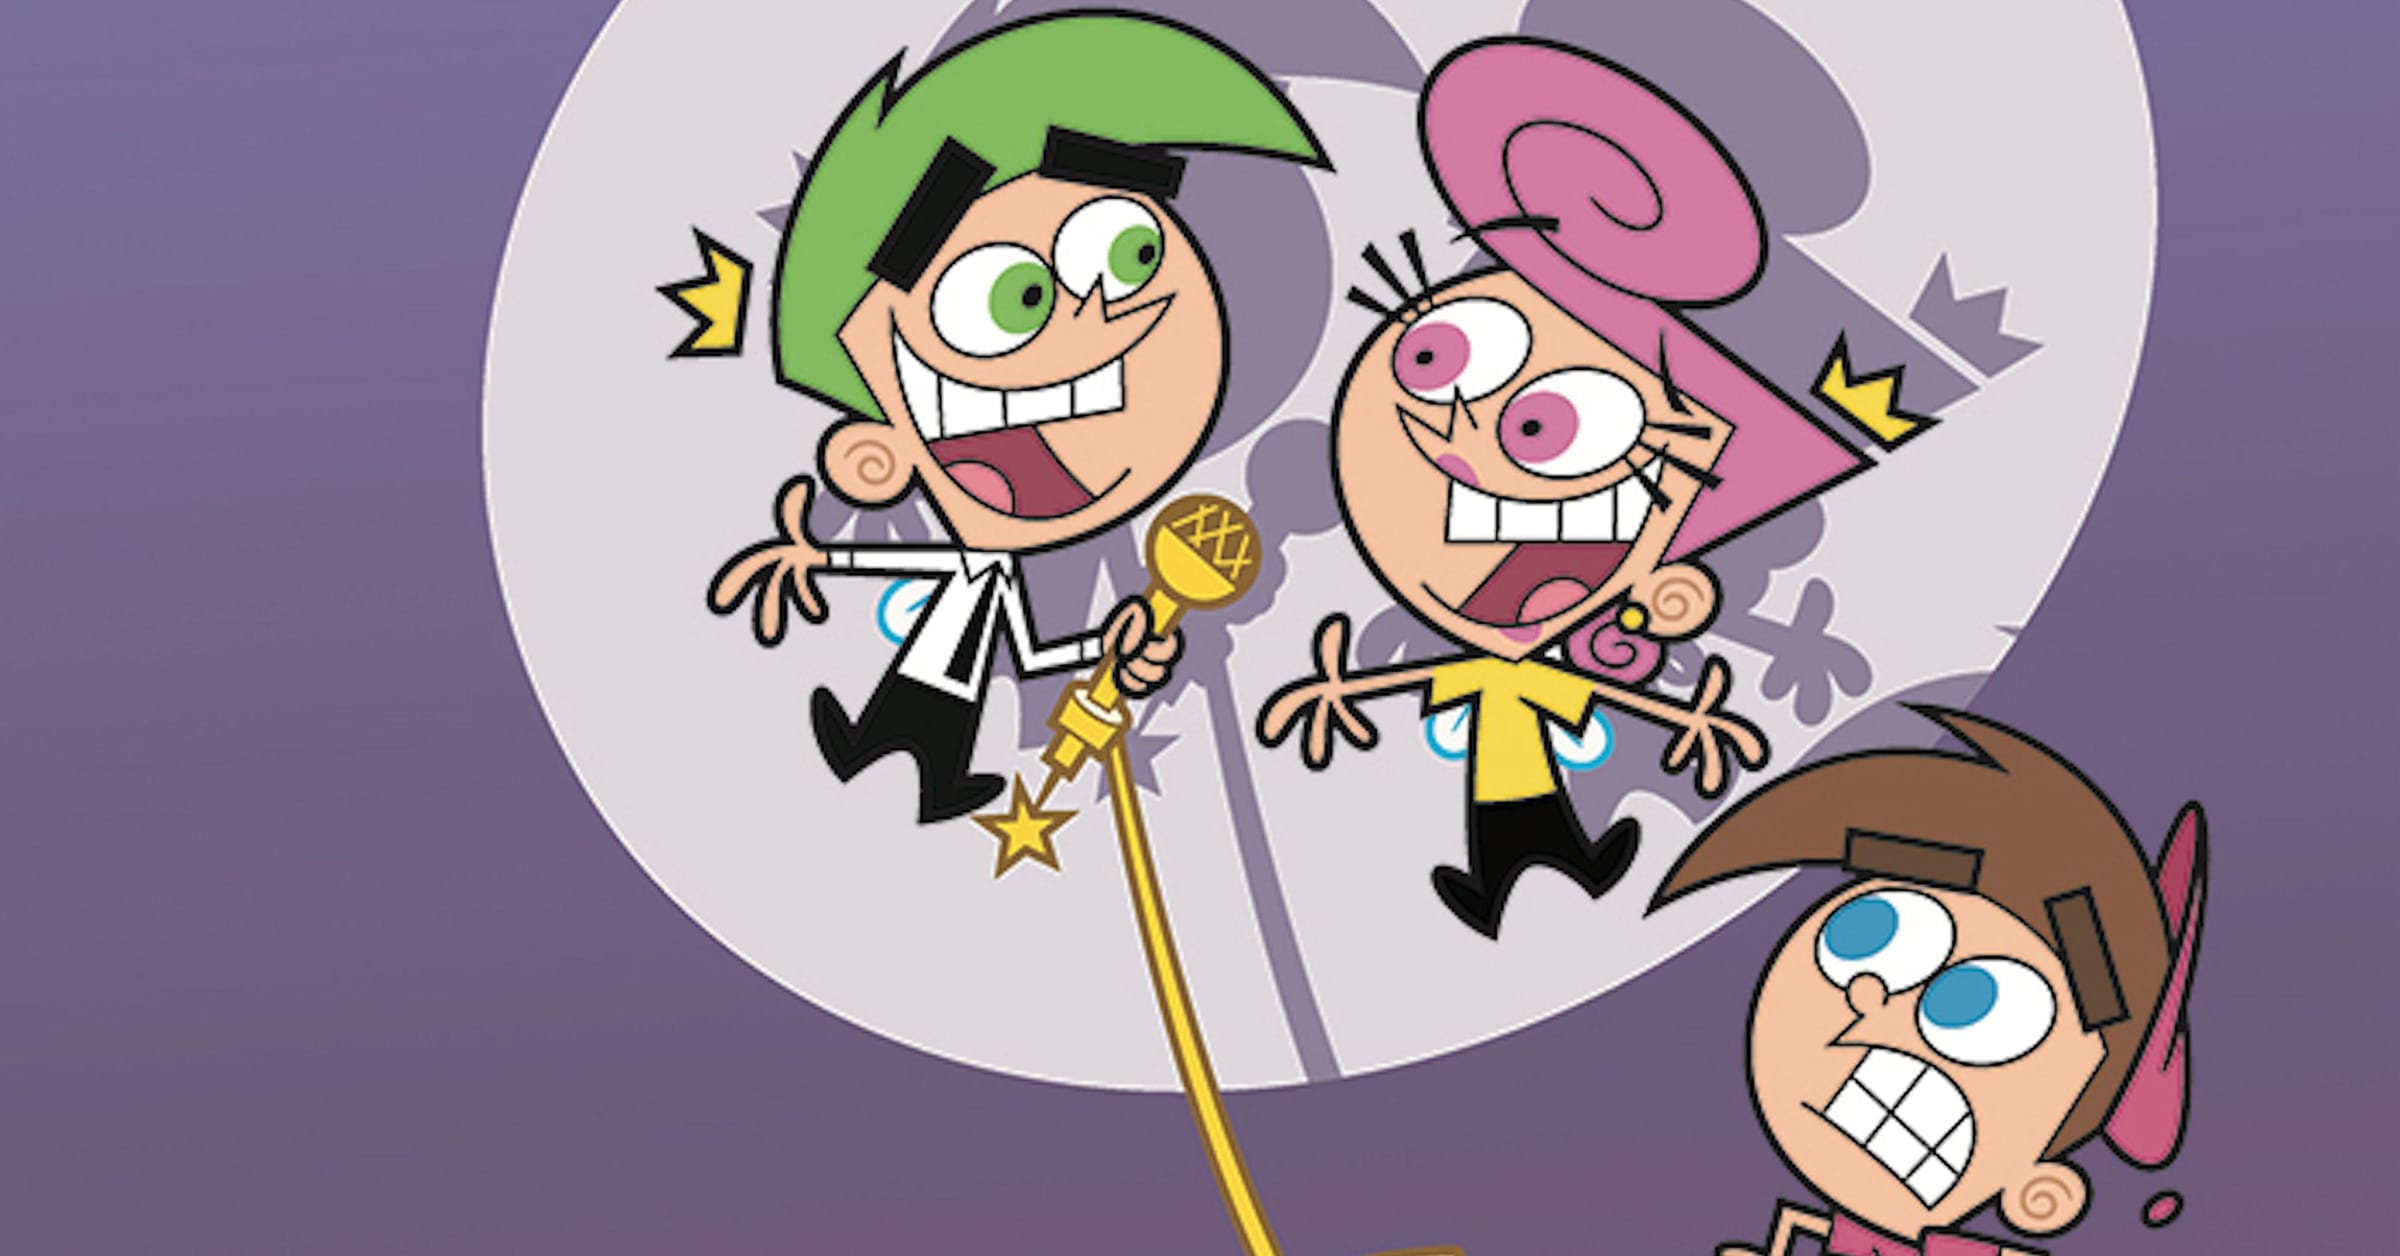 Fairly Oddparents Porn Comic Sf Edition - The Fairly OddParents' Fan Theories That Make A Lot Of Sense